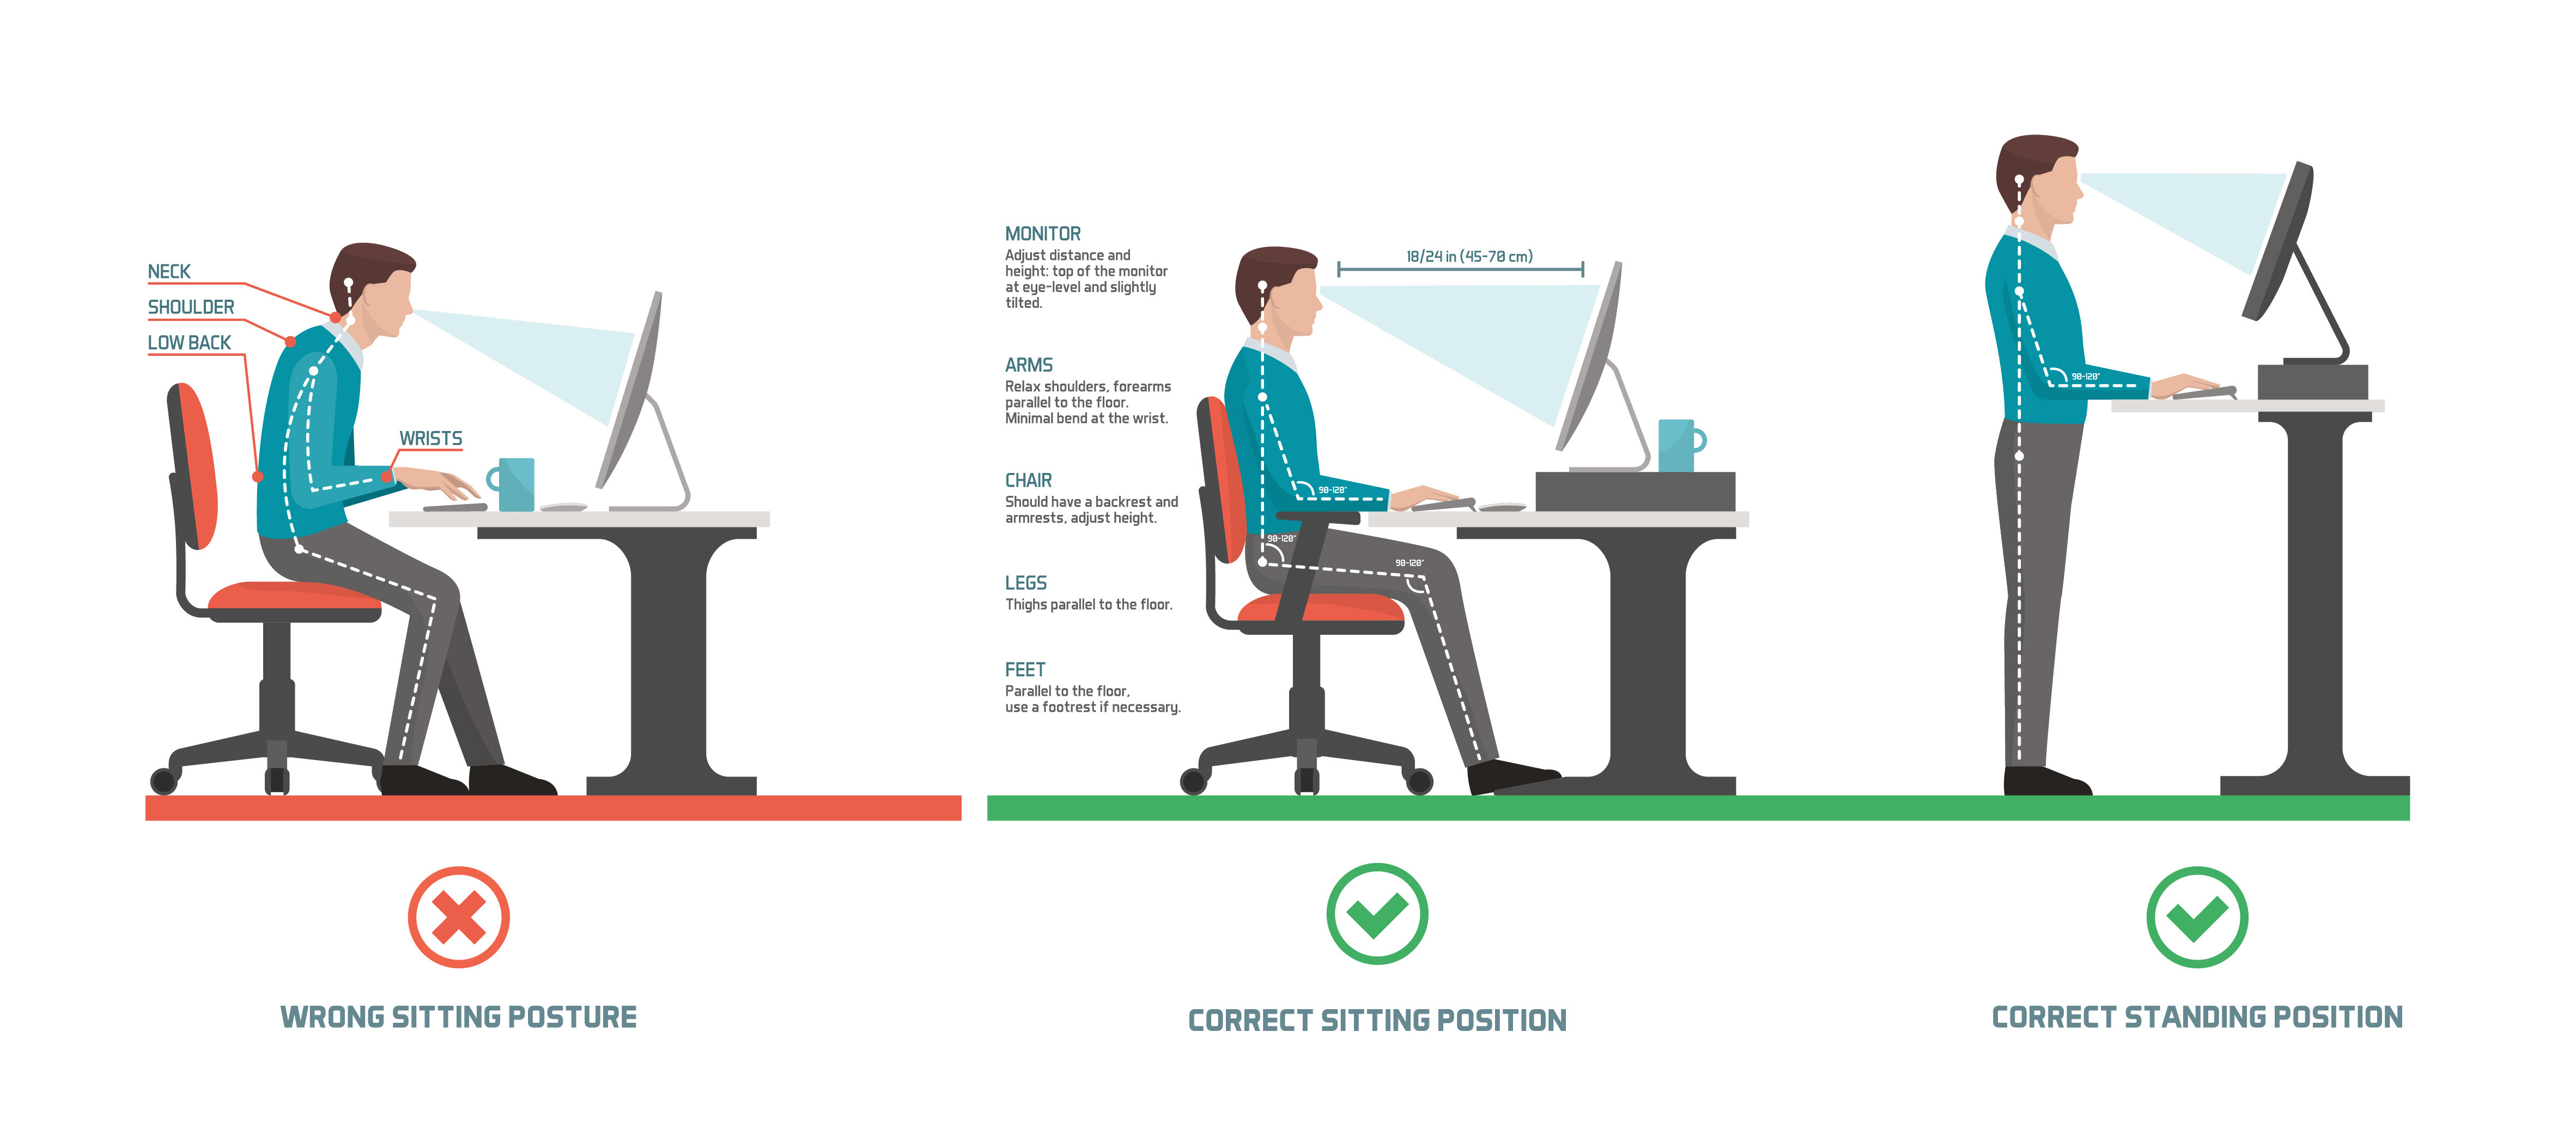 How to Set Up an Ergonomic WorkStation